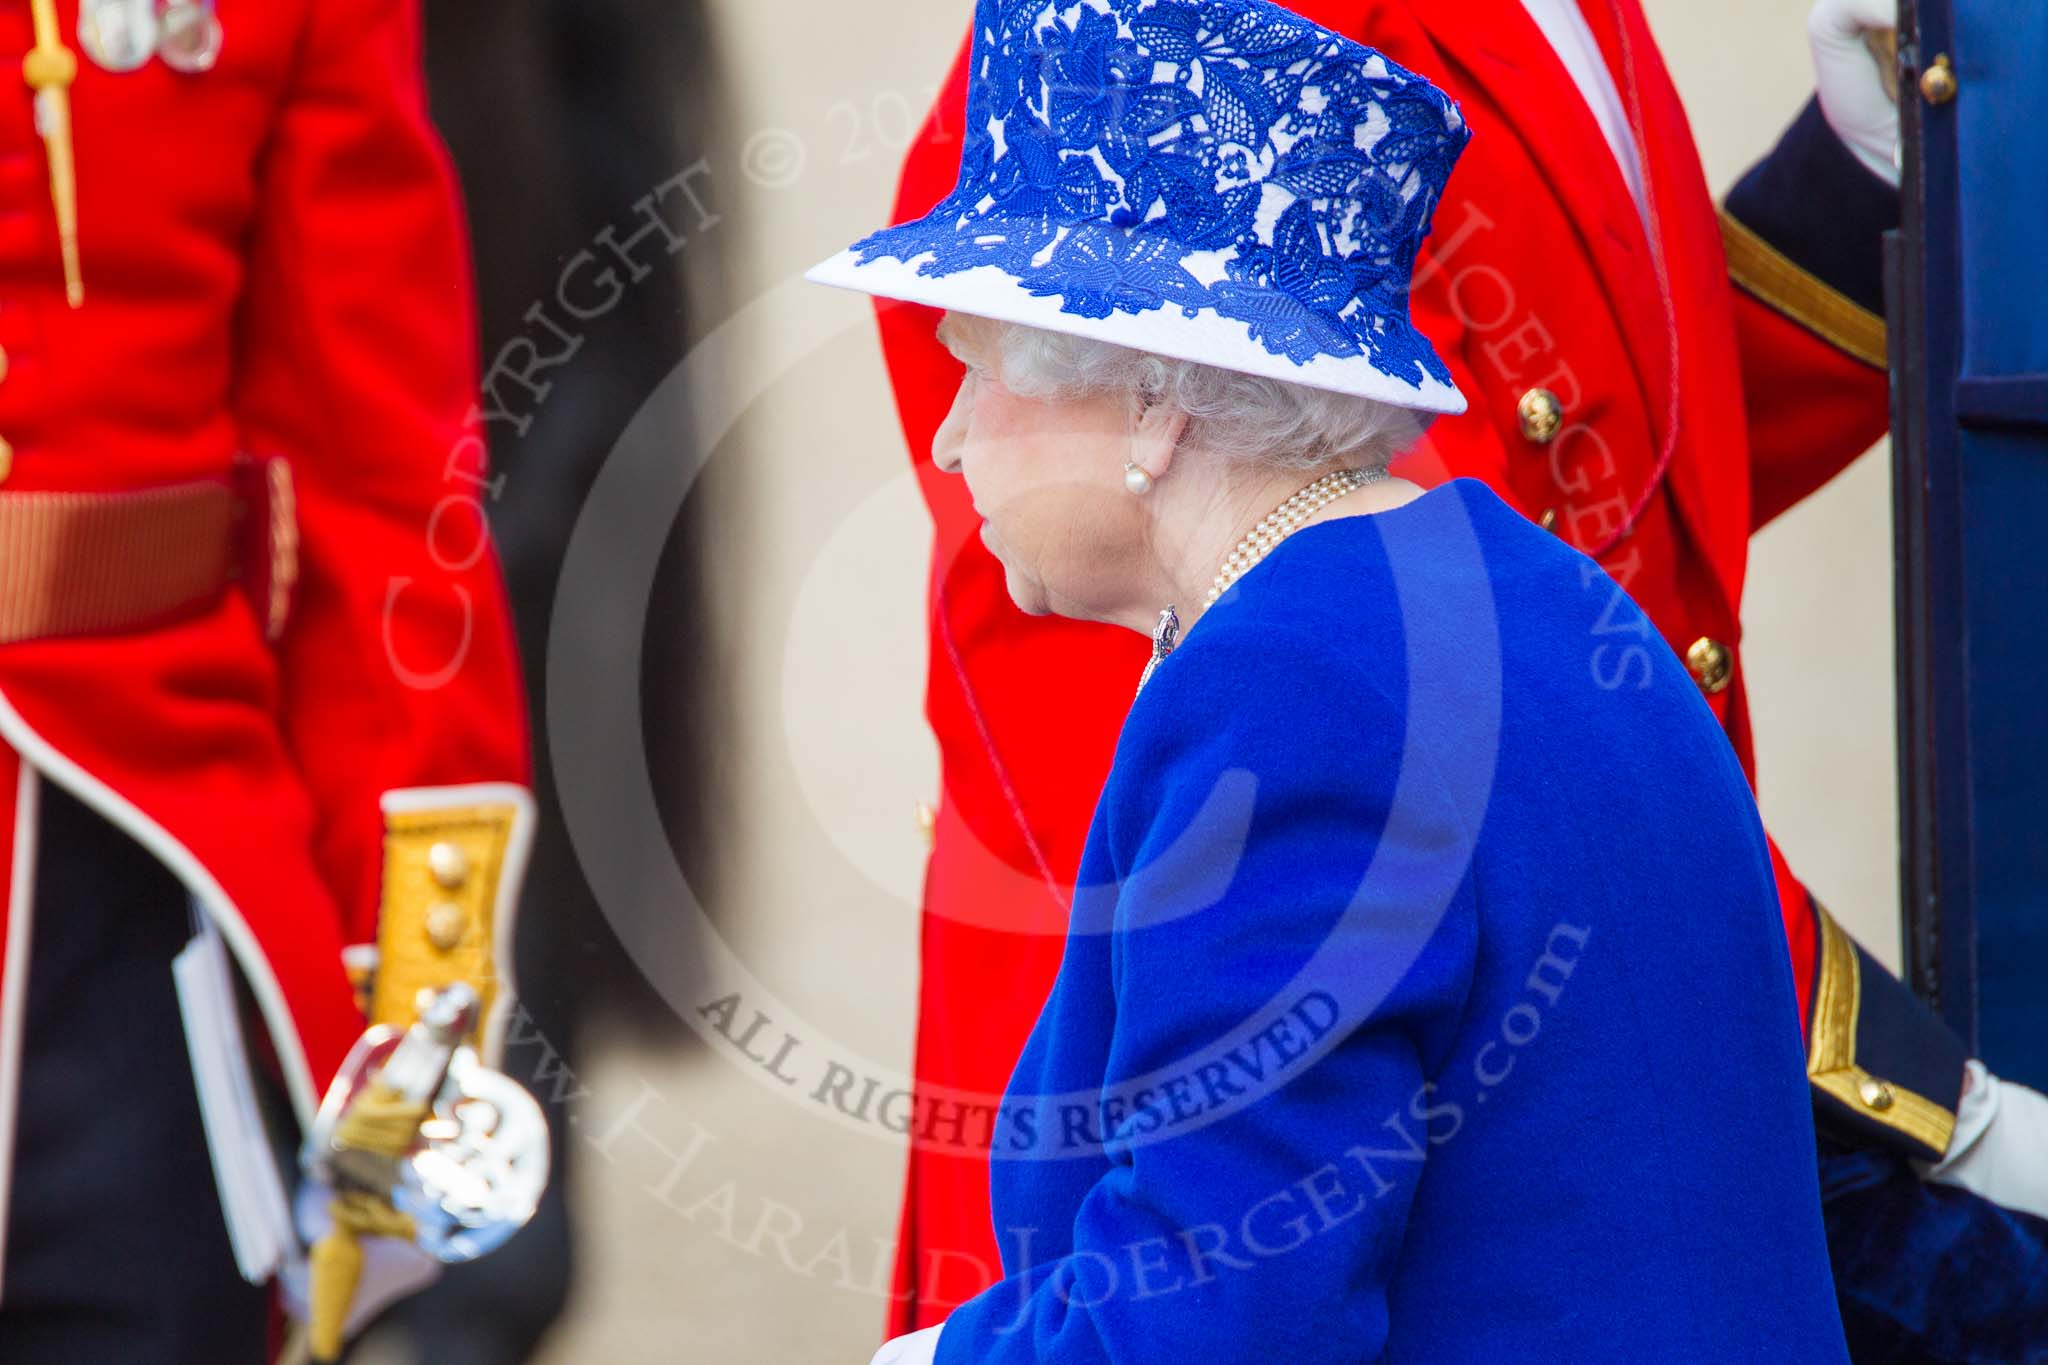 Trooping the Colour 2013: HM The Queen leaving the Glass Coach to be o the dais at exactly 1100 hours. Image #293, 15 June 2013 11:00 Horse Guards Parade, London, UK